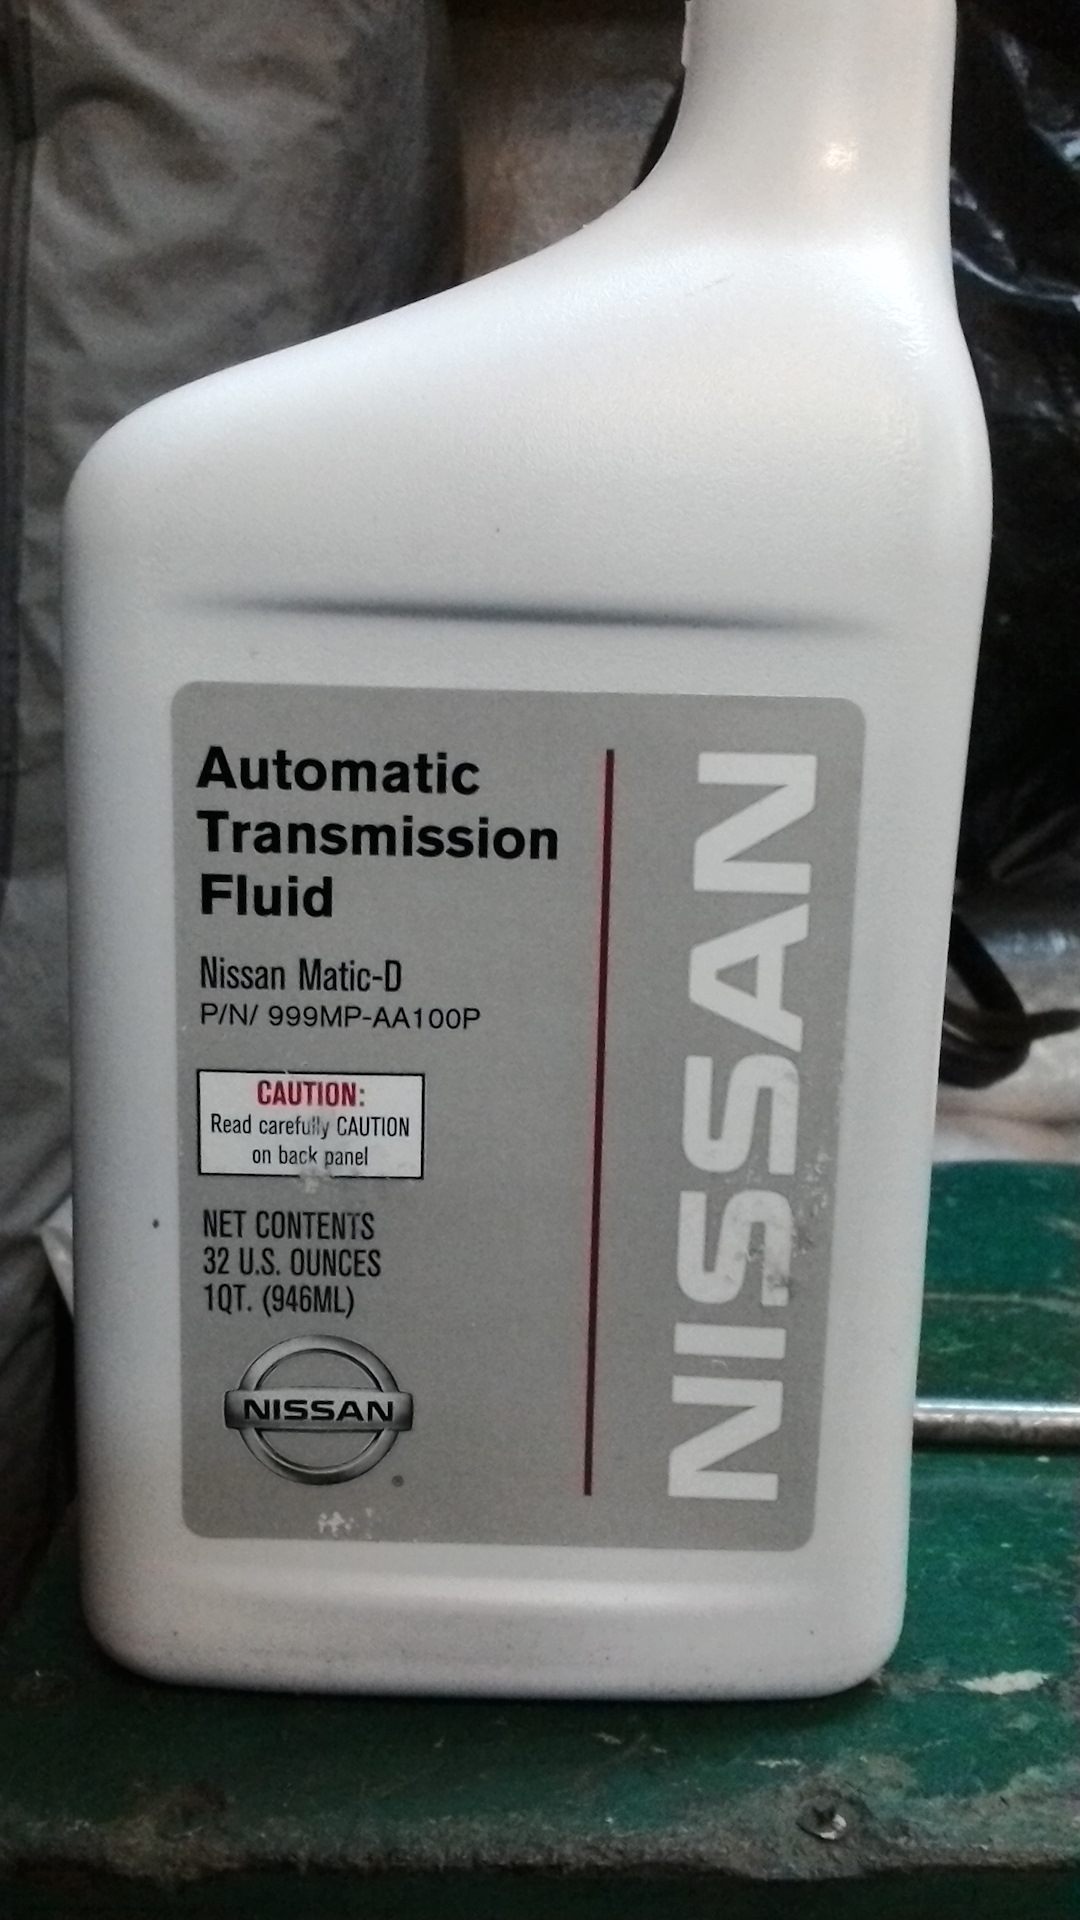 Масло nissan atf matic. Nissan ATF matic g Fluid. Nissan matic Fluid d. ATF matic Fluid d. Nissan ATF matic Fluid цвет.